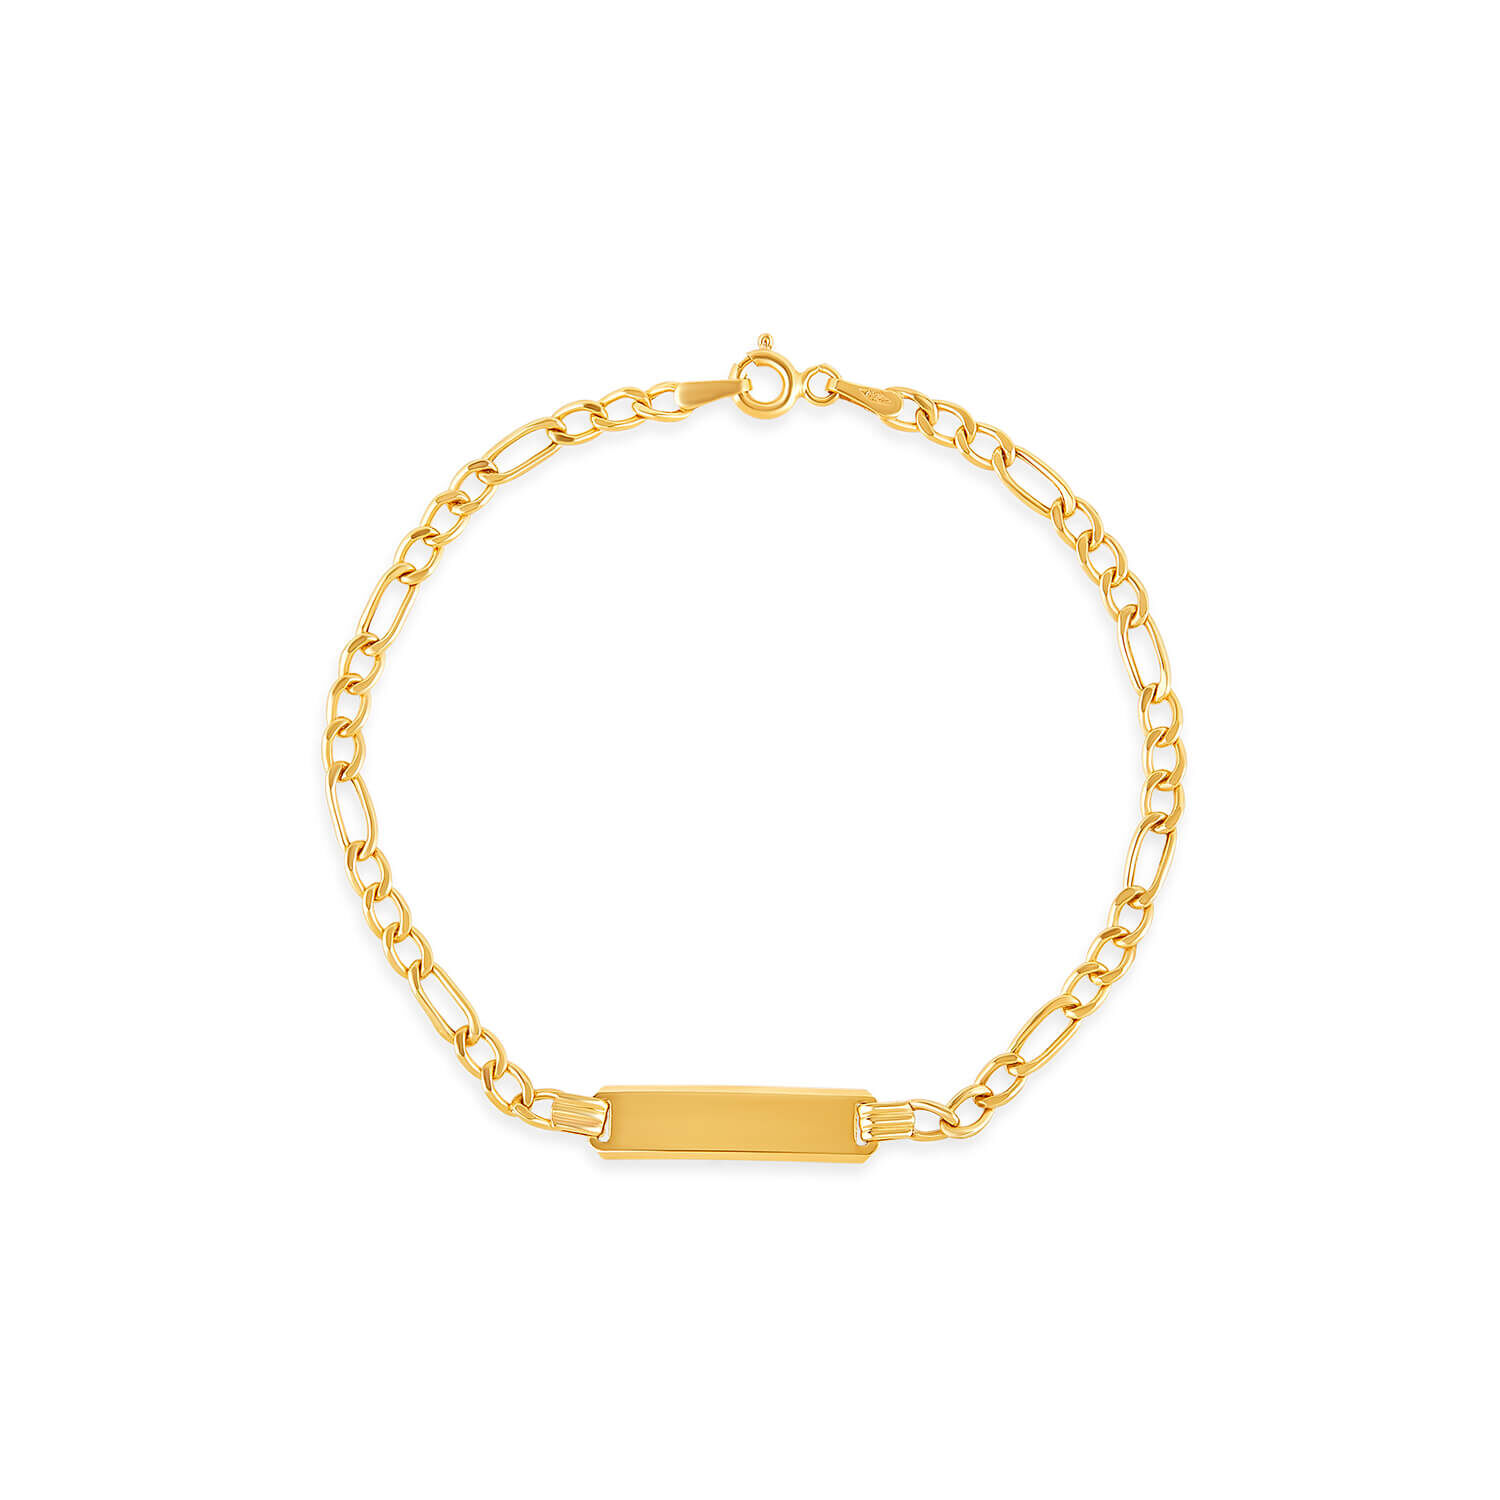 SOLID 9ct Yellow Gold Identity Bracelet  Heavy 652 grams Length 9in  2286cm  KEO Jewellers